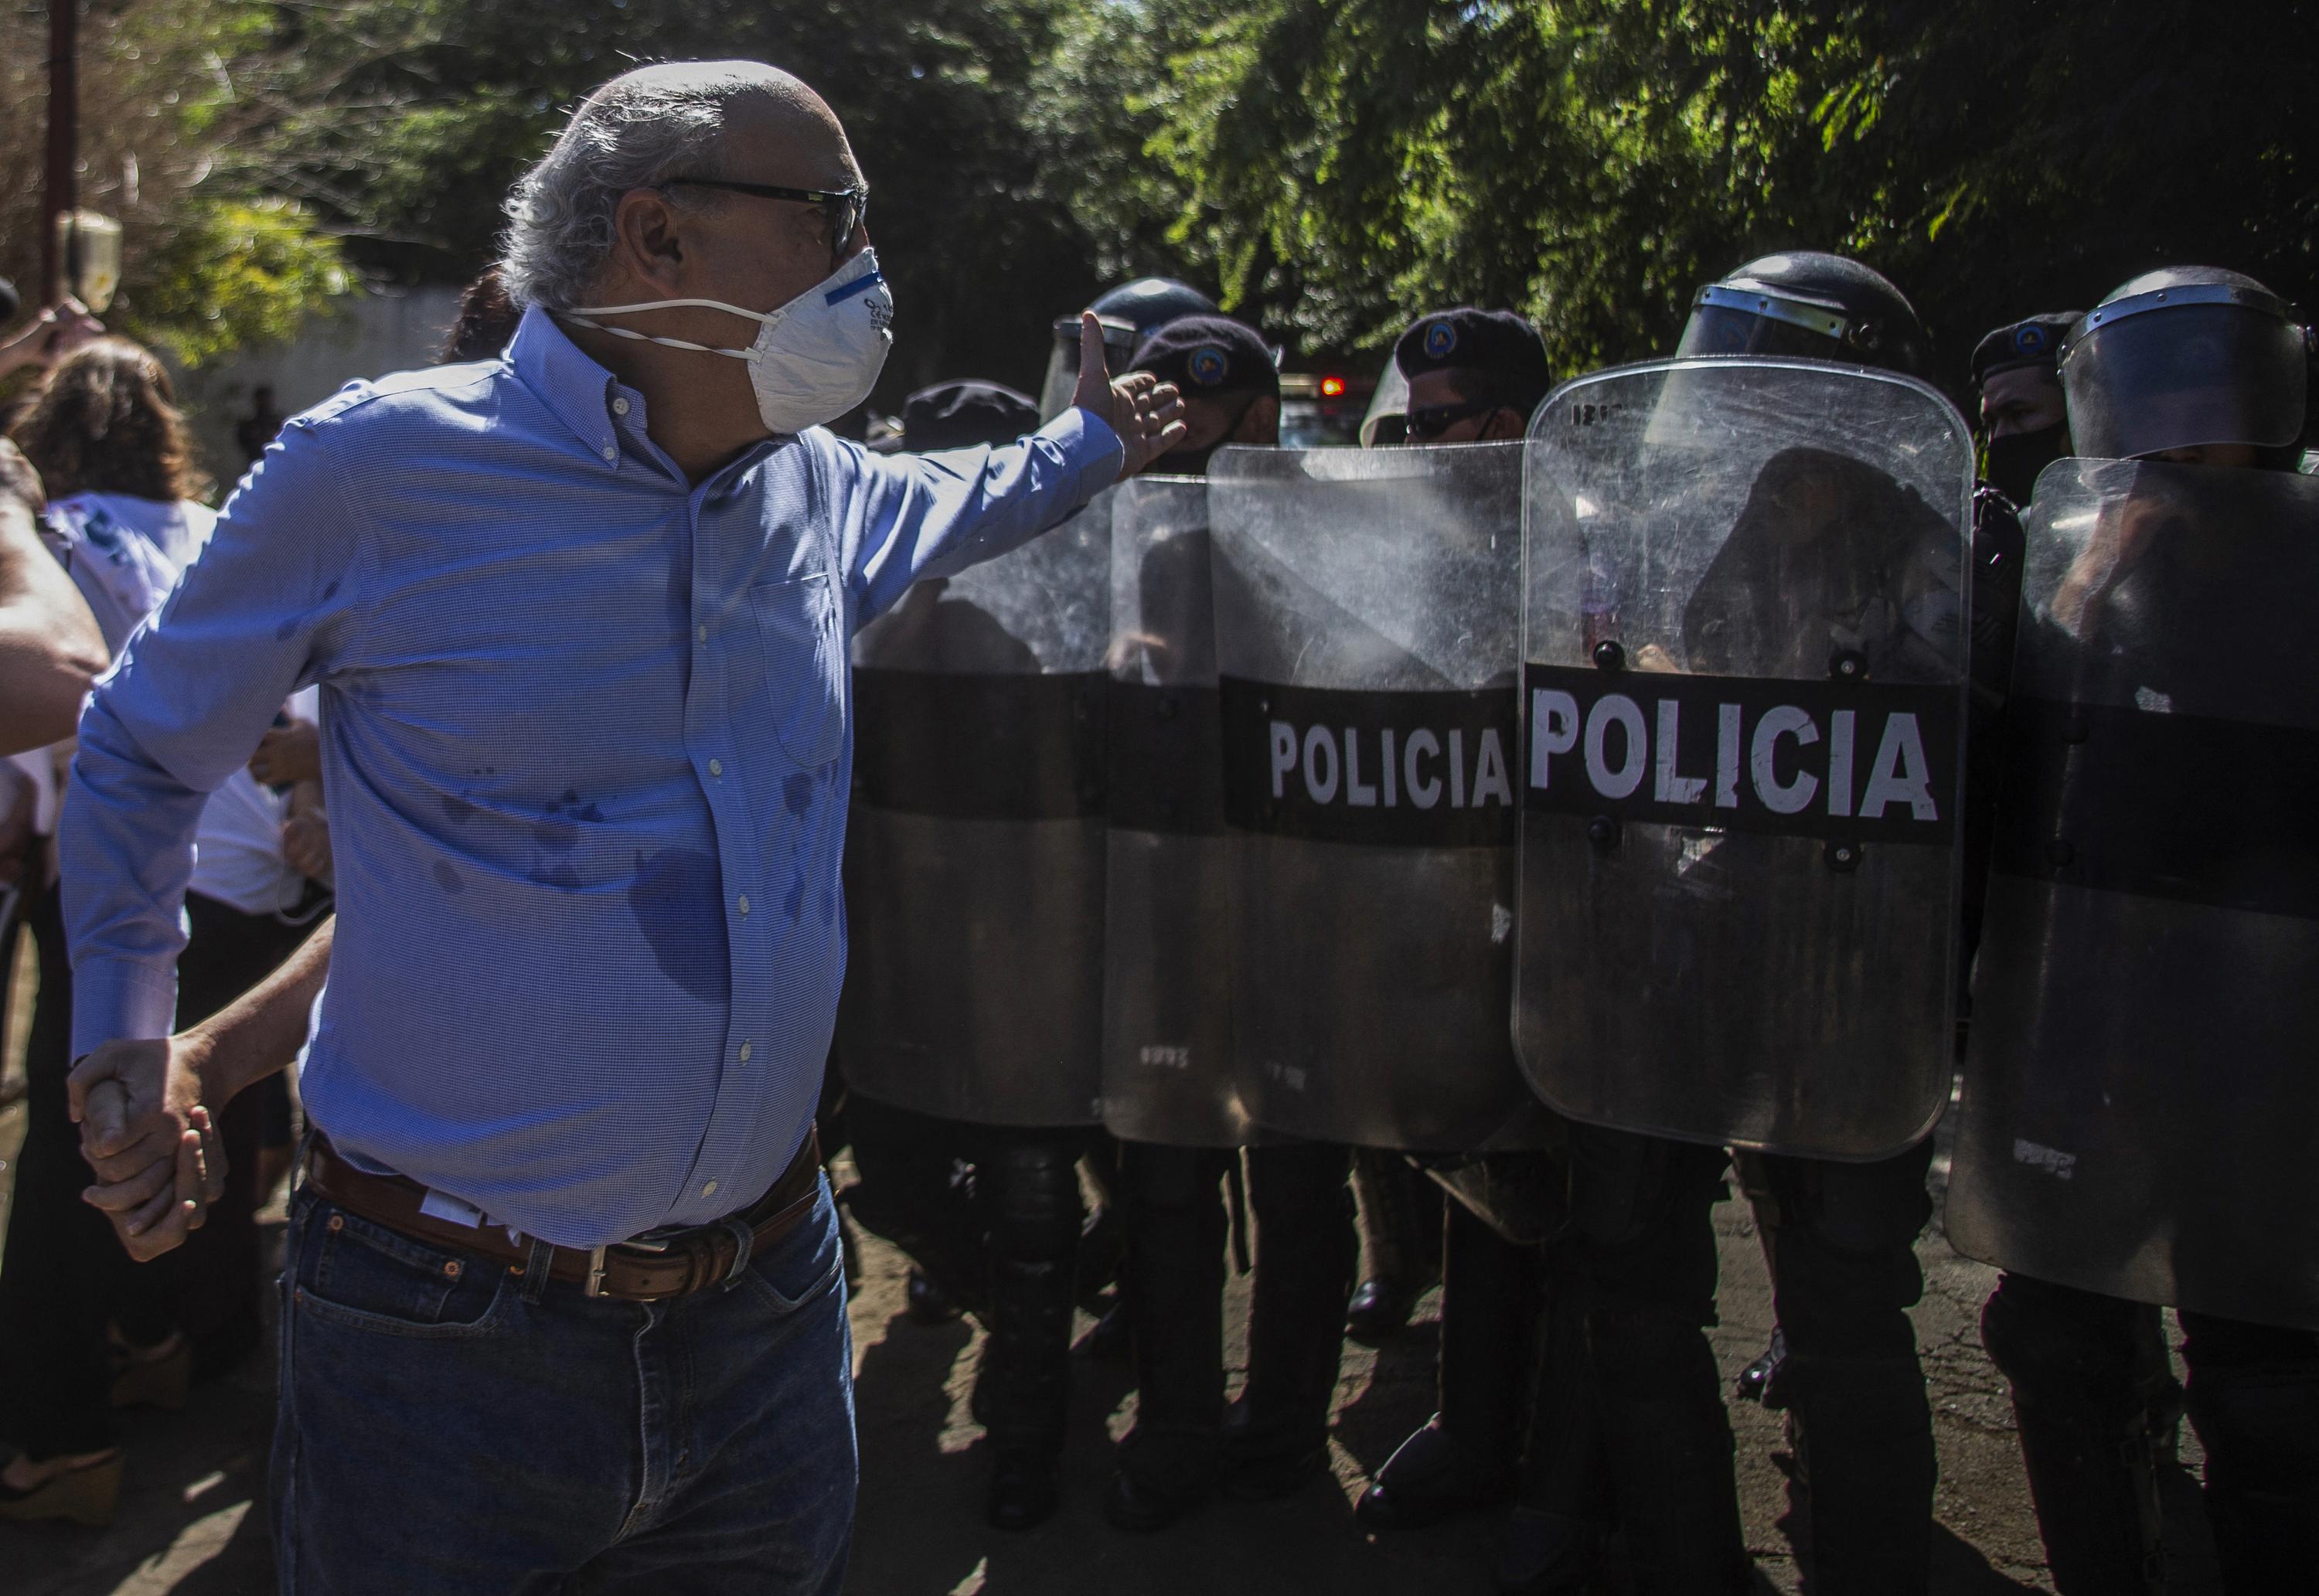 Nicaraguan journalist Carlos Fernando Chamorro, director of El Confidencial and of the televised news program Esta Semana, is pushed back by riot police on December 14, 2020 in front of the El Confidencial offices in Managua, seized two years earlier by the regime of President Daniel Ortega. Photo AFP